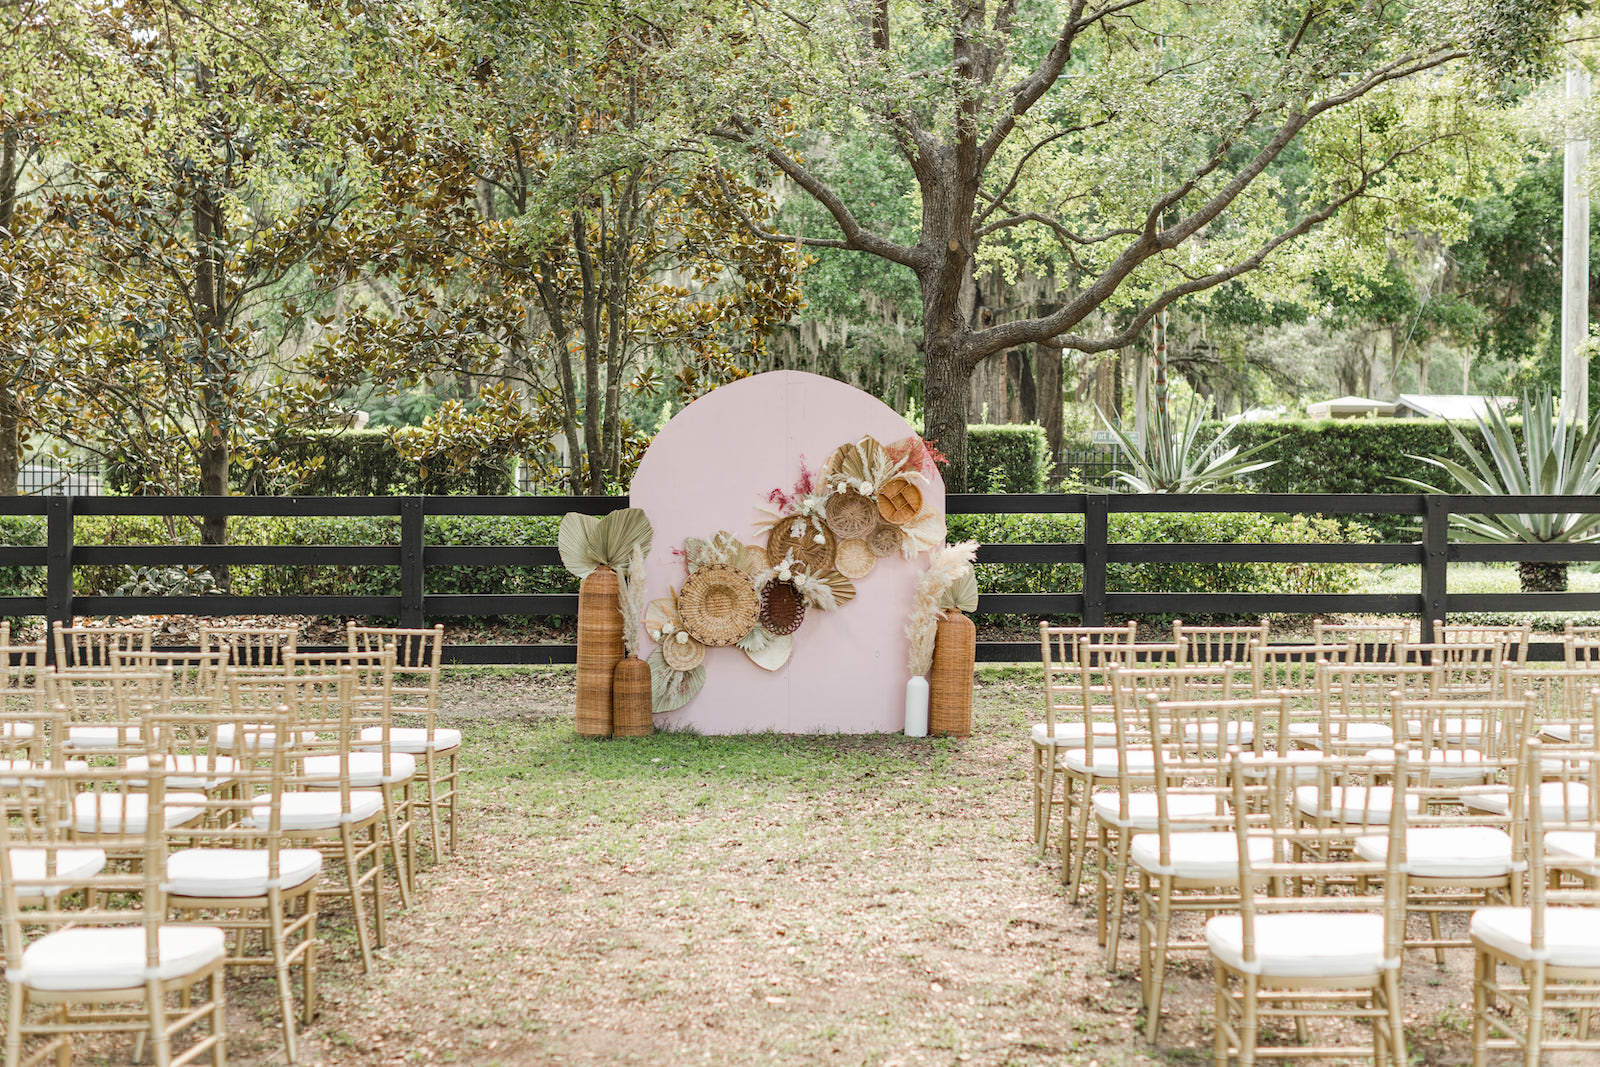 Boho Mid-Century Modern Wedding Ceremony Decor, Wooden Arched Pink Backdrop with Dried Flowers and Leaves, Tall Wooden Vases, Gold Chiavari Chairs | Tampa Bay Wedding Ceremony Backdrop Designer Taylored Affairs | Florida Wedding Venue Mision Lago Estates | Wedding Chair Rentals Kate Ryan Event Rentals